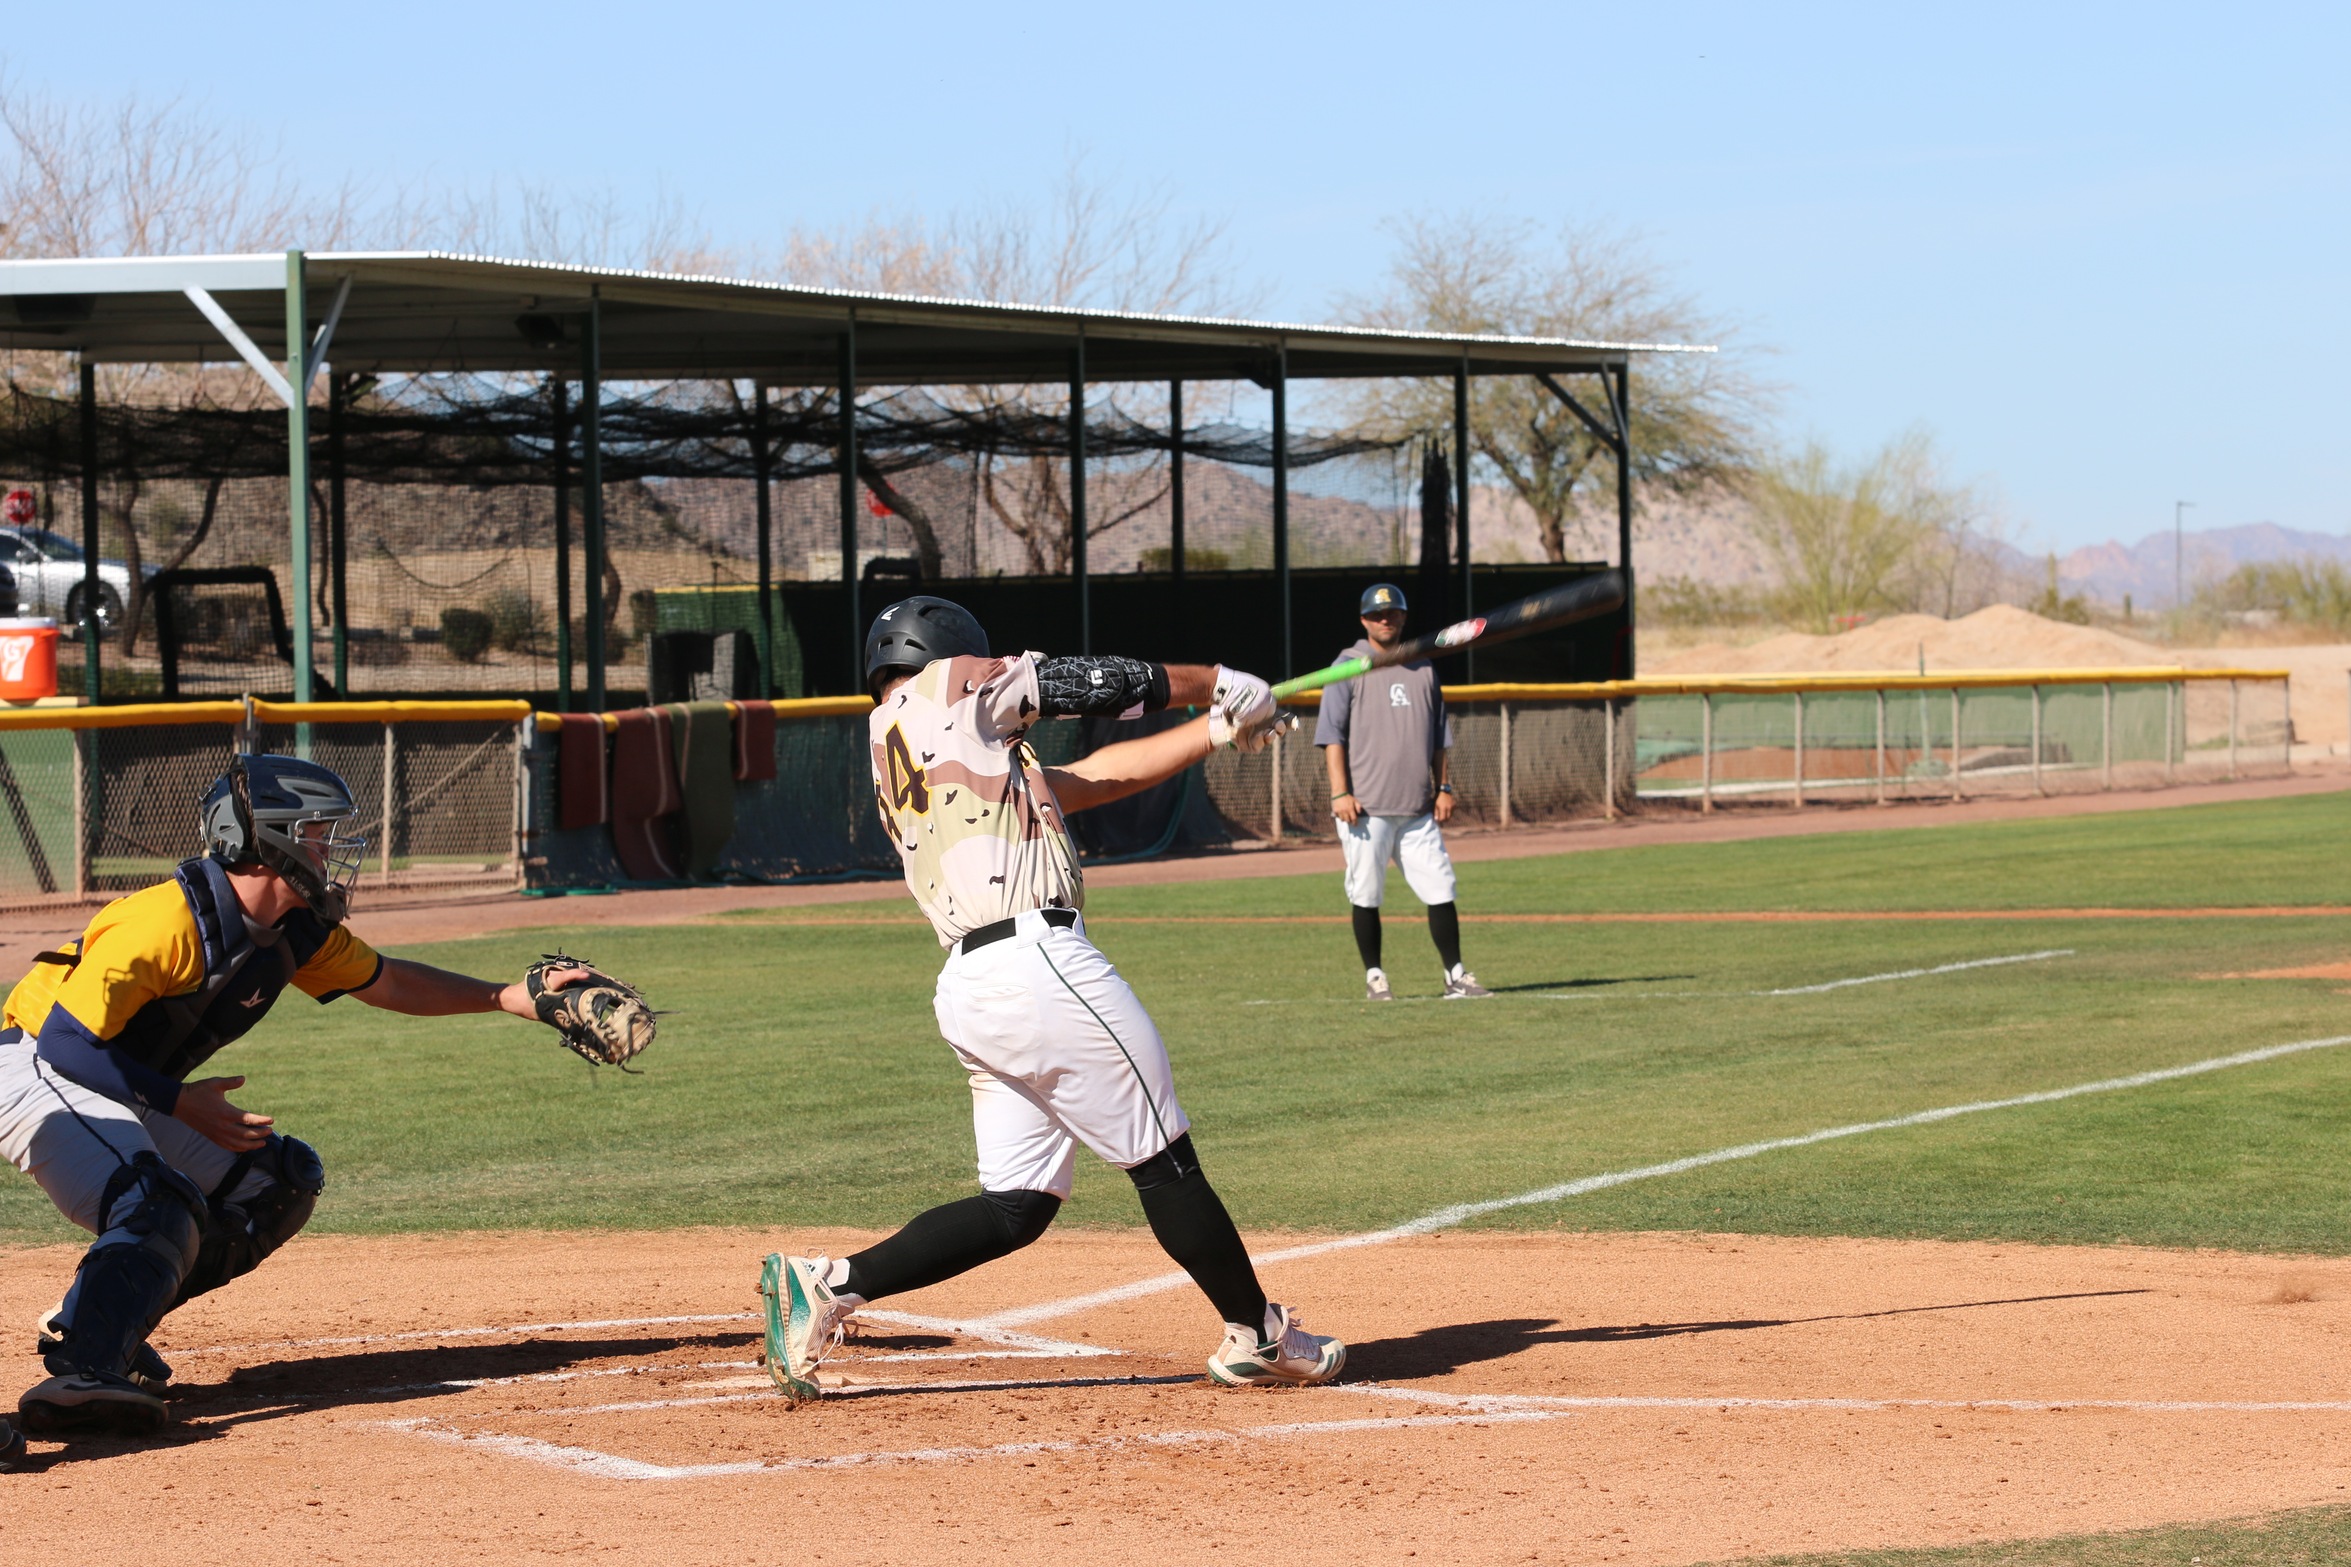 Blake Avila homered Saturday during game one in Thatcher, one of four Vaquero homeruns on the day.